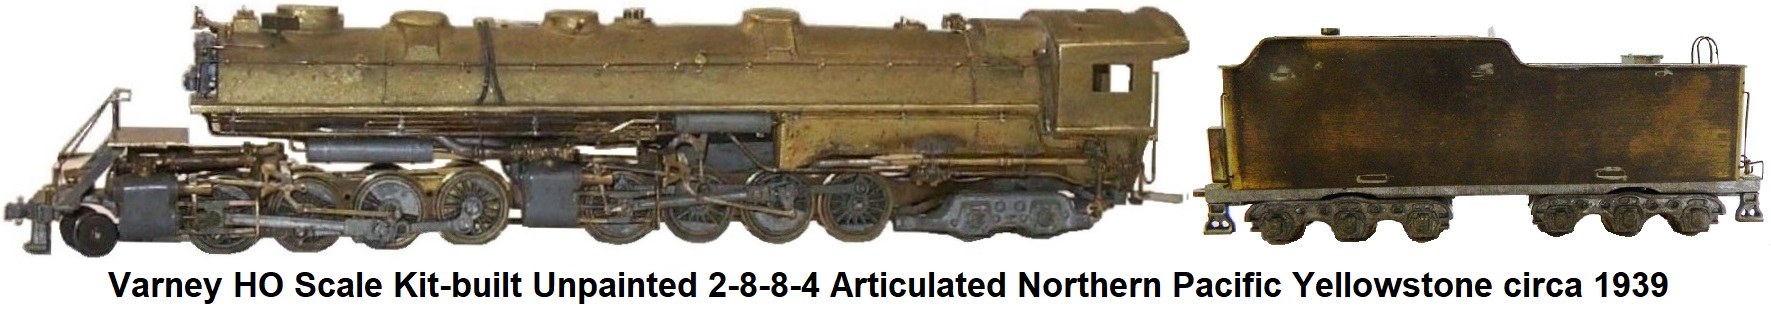 Varney kit-built 2-8-8-4 articulated Northern Pacific Yellowstone in HO gauge circa 1939